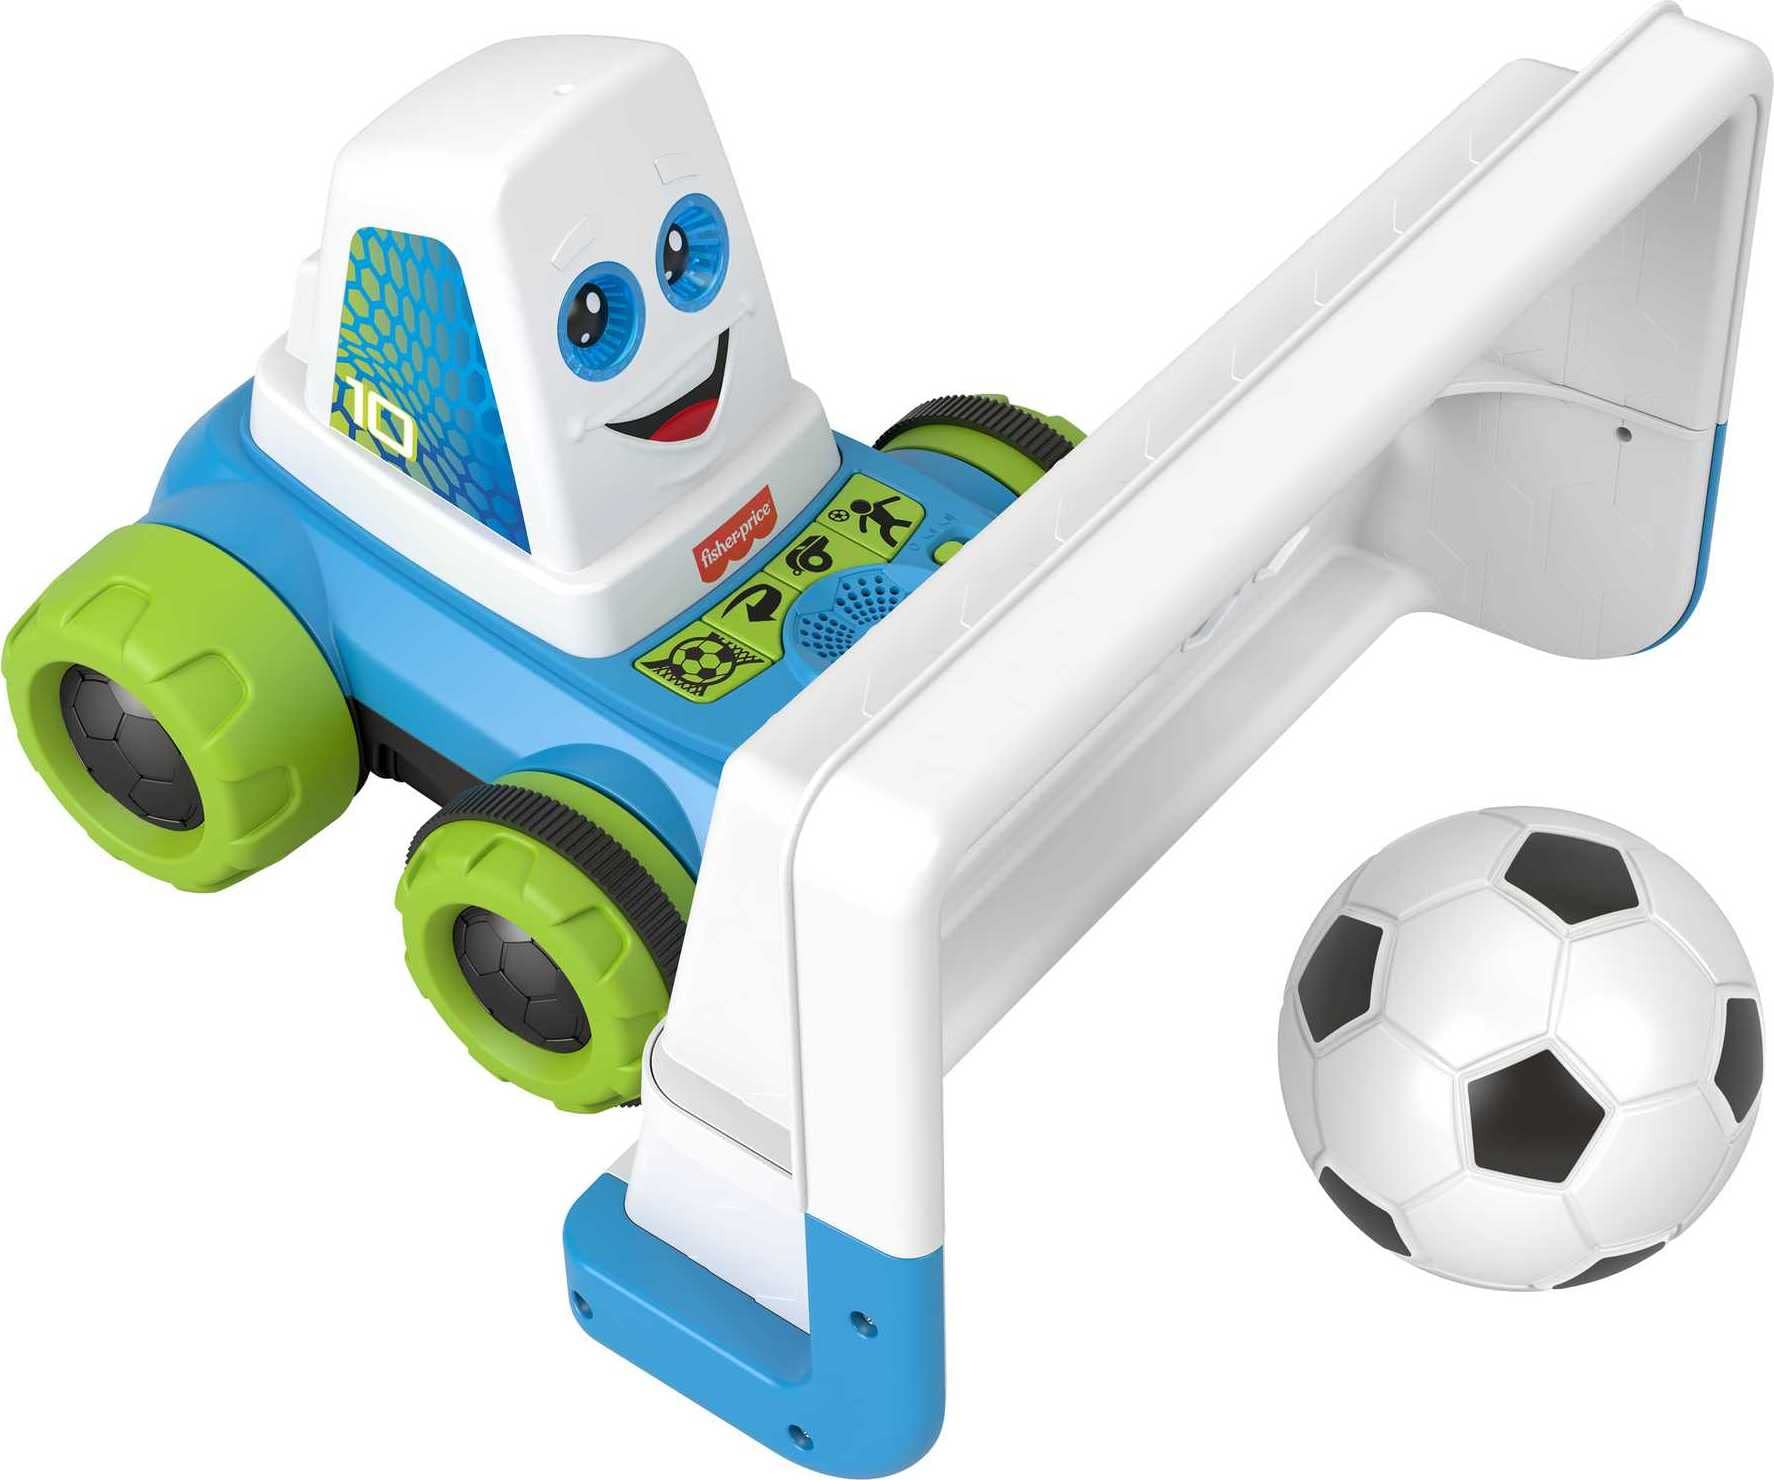 Fisher-Price Goaldozer Motorized Electronic Soccer Game Net w/ Lights & Sounds $18 + Free Shipping w/ Prime or on orders $35+